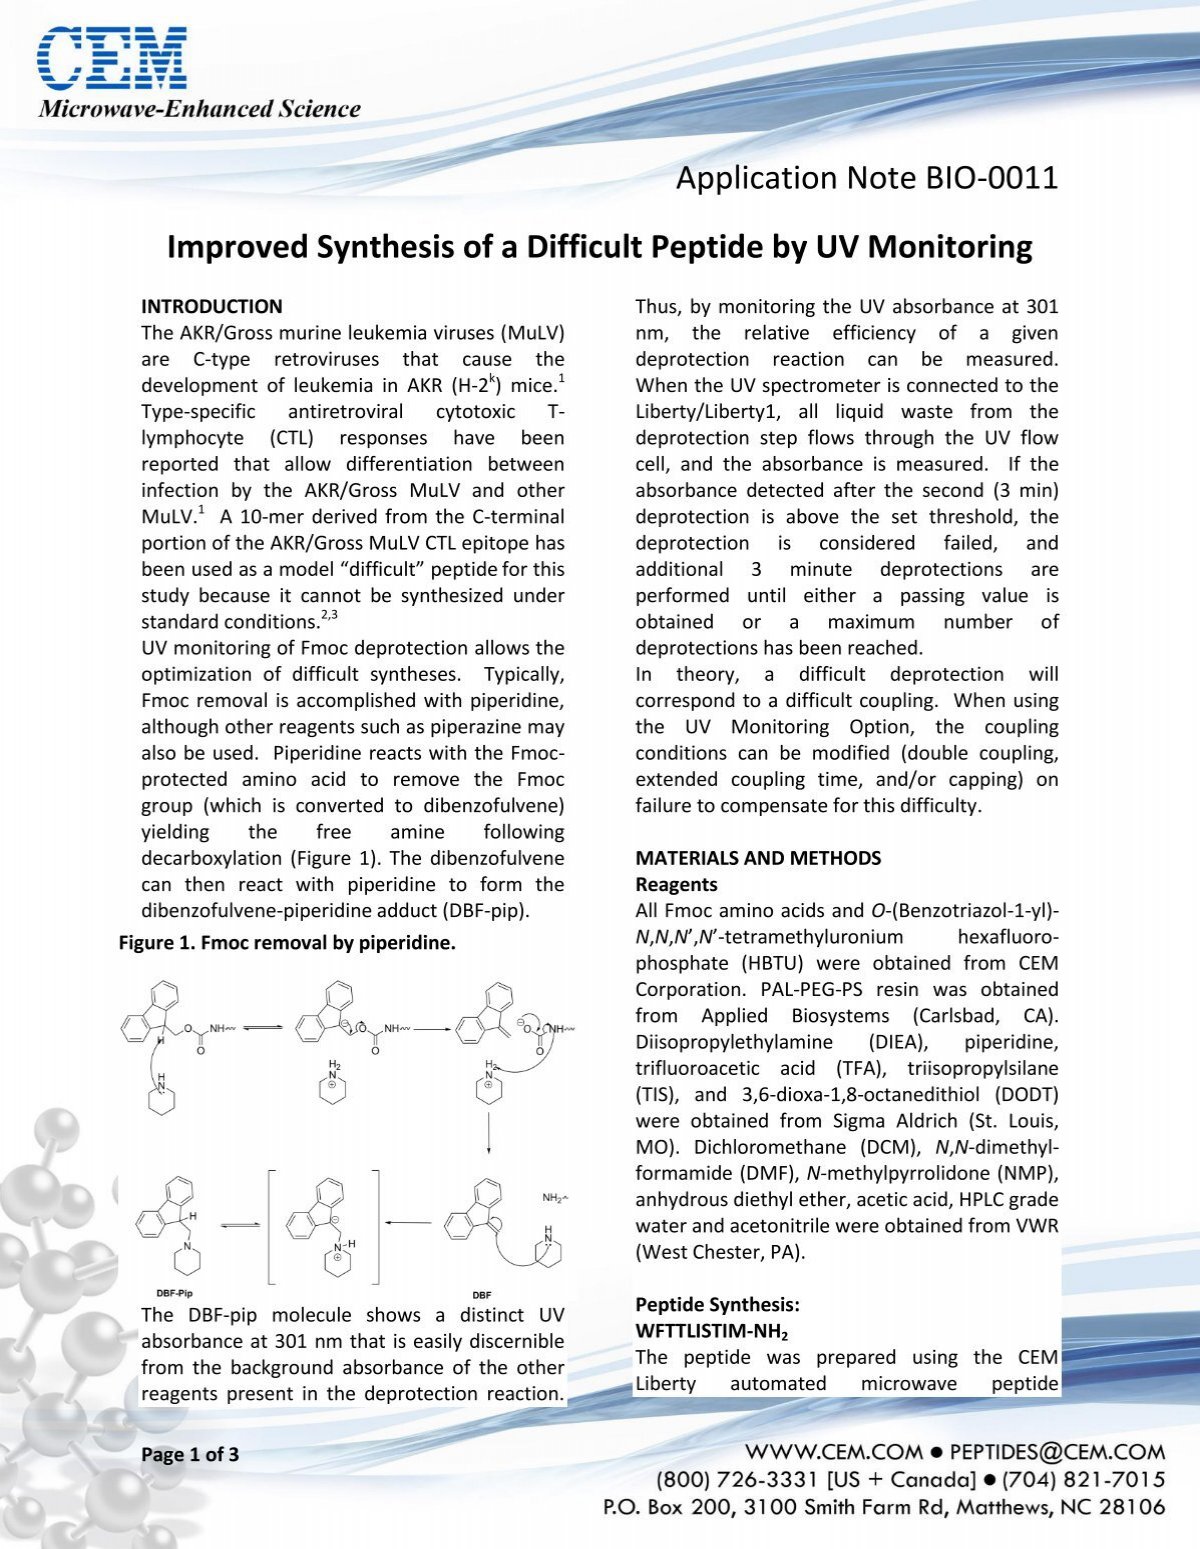 Improved Synthesis Of A Difficult Peptide By Uv Monitoring